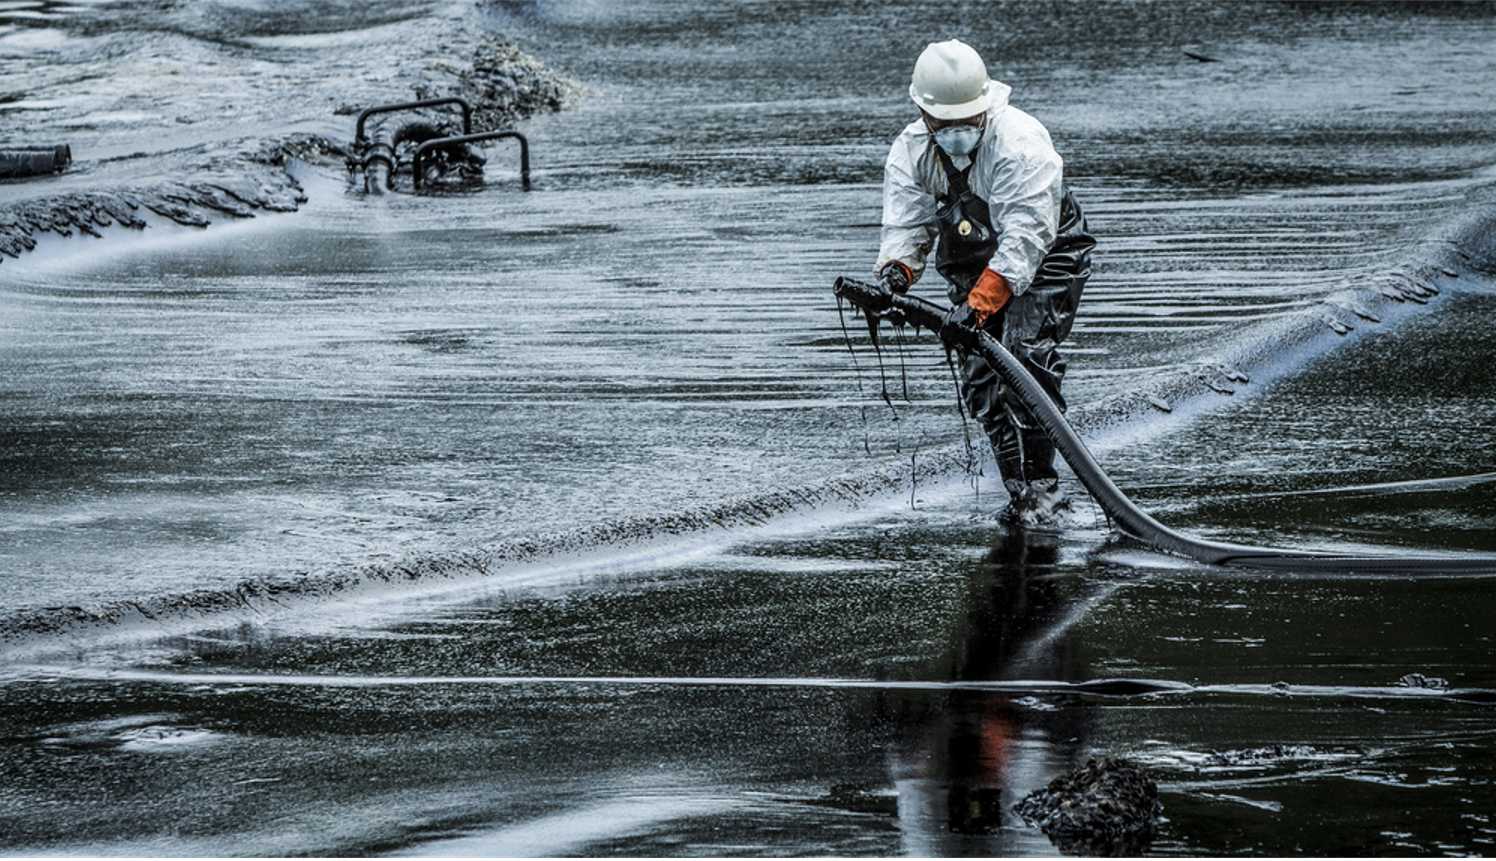 10 of the Largest Oil Spills in History